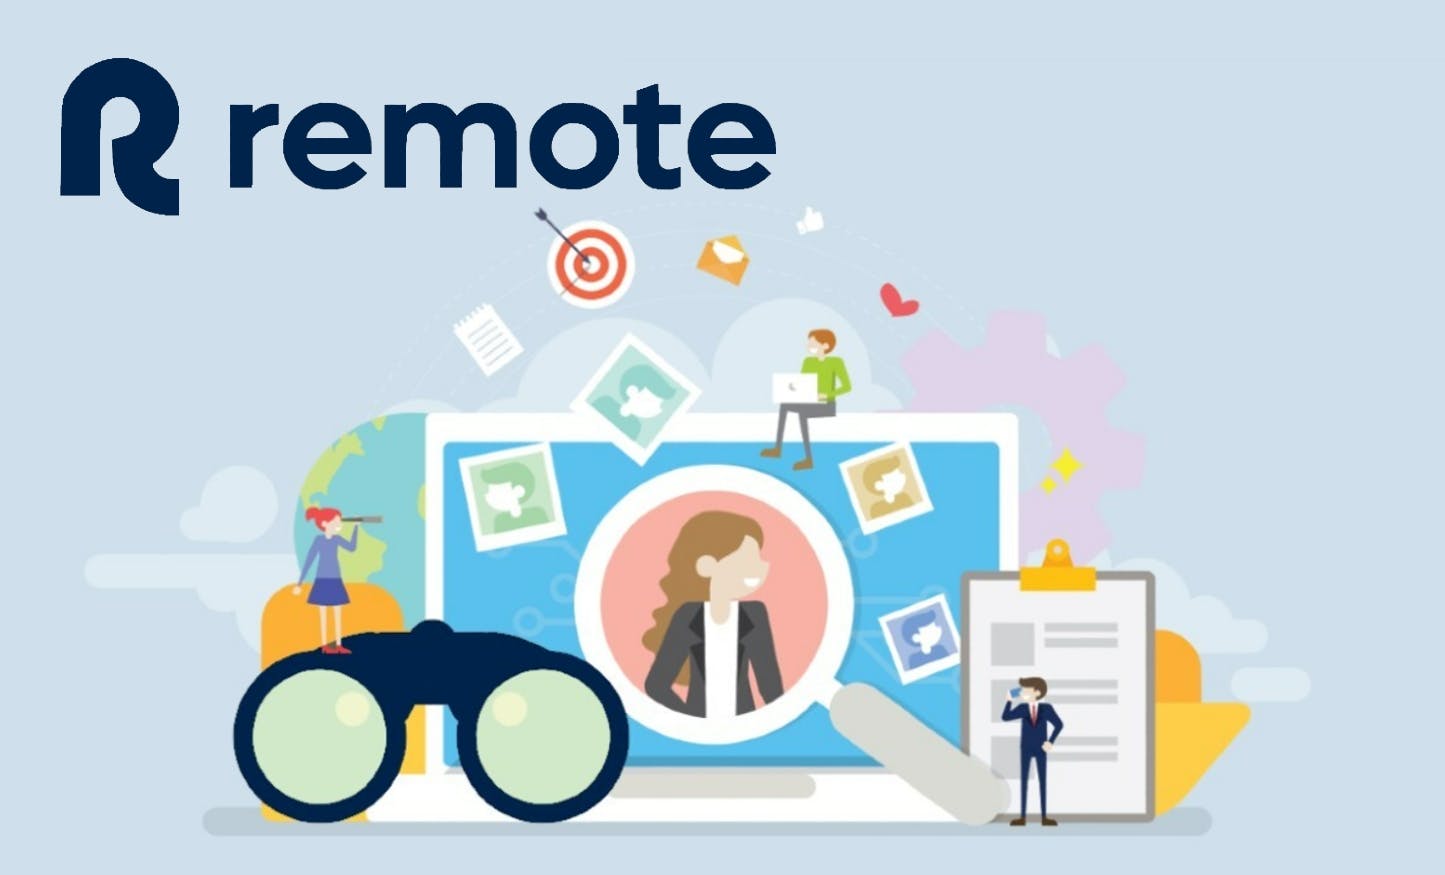 Remote: Full Review, Services and Solutions